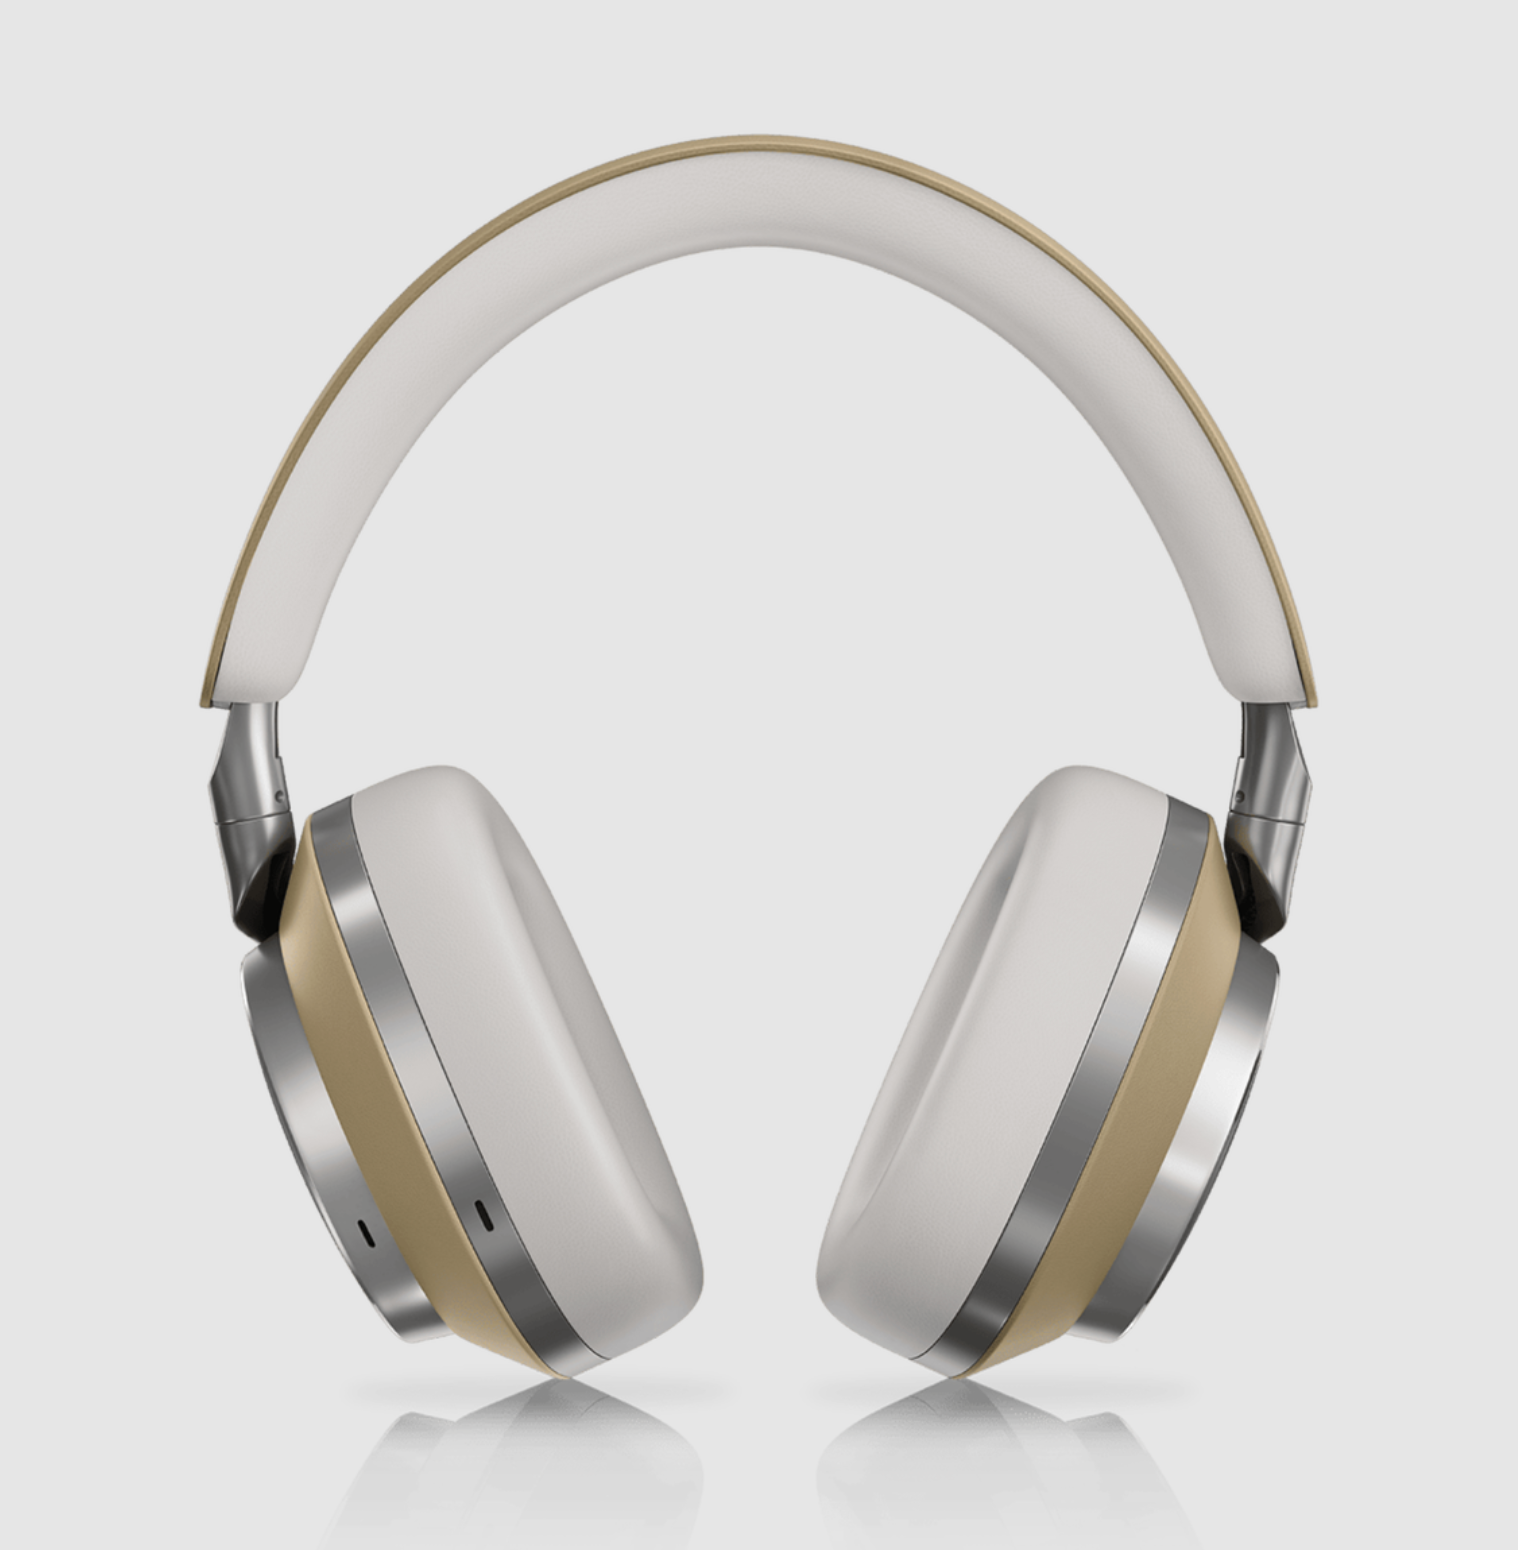 B&W Px8 Noise Cancelling Headphones in Tan. Image of front